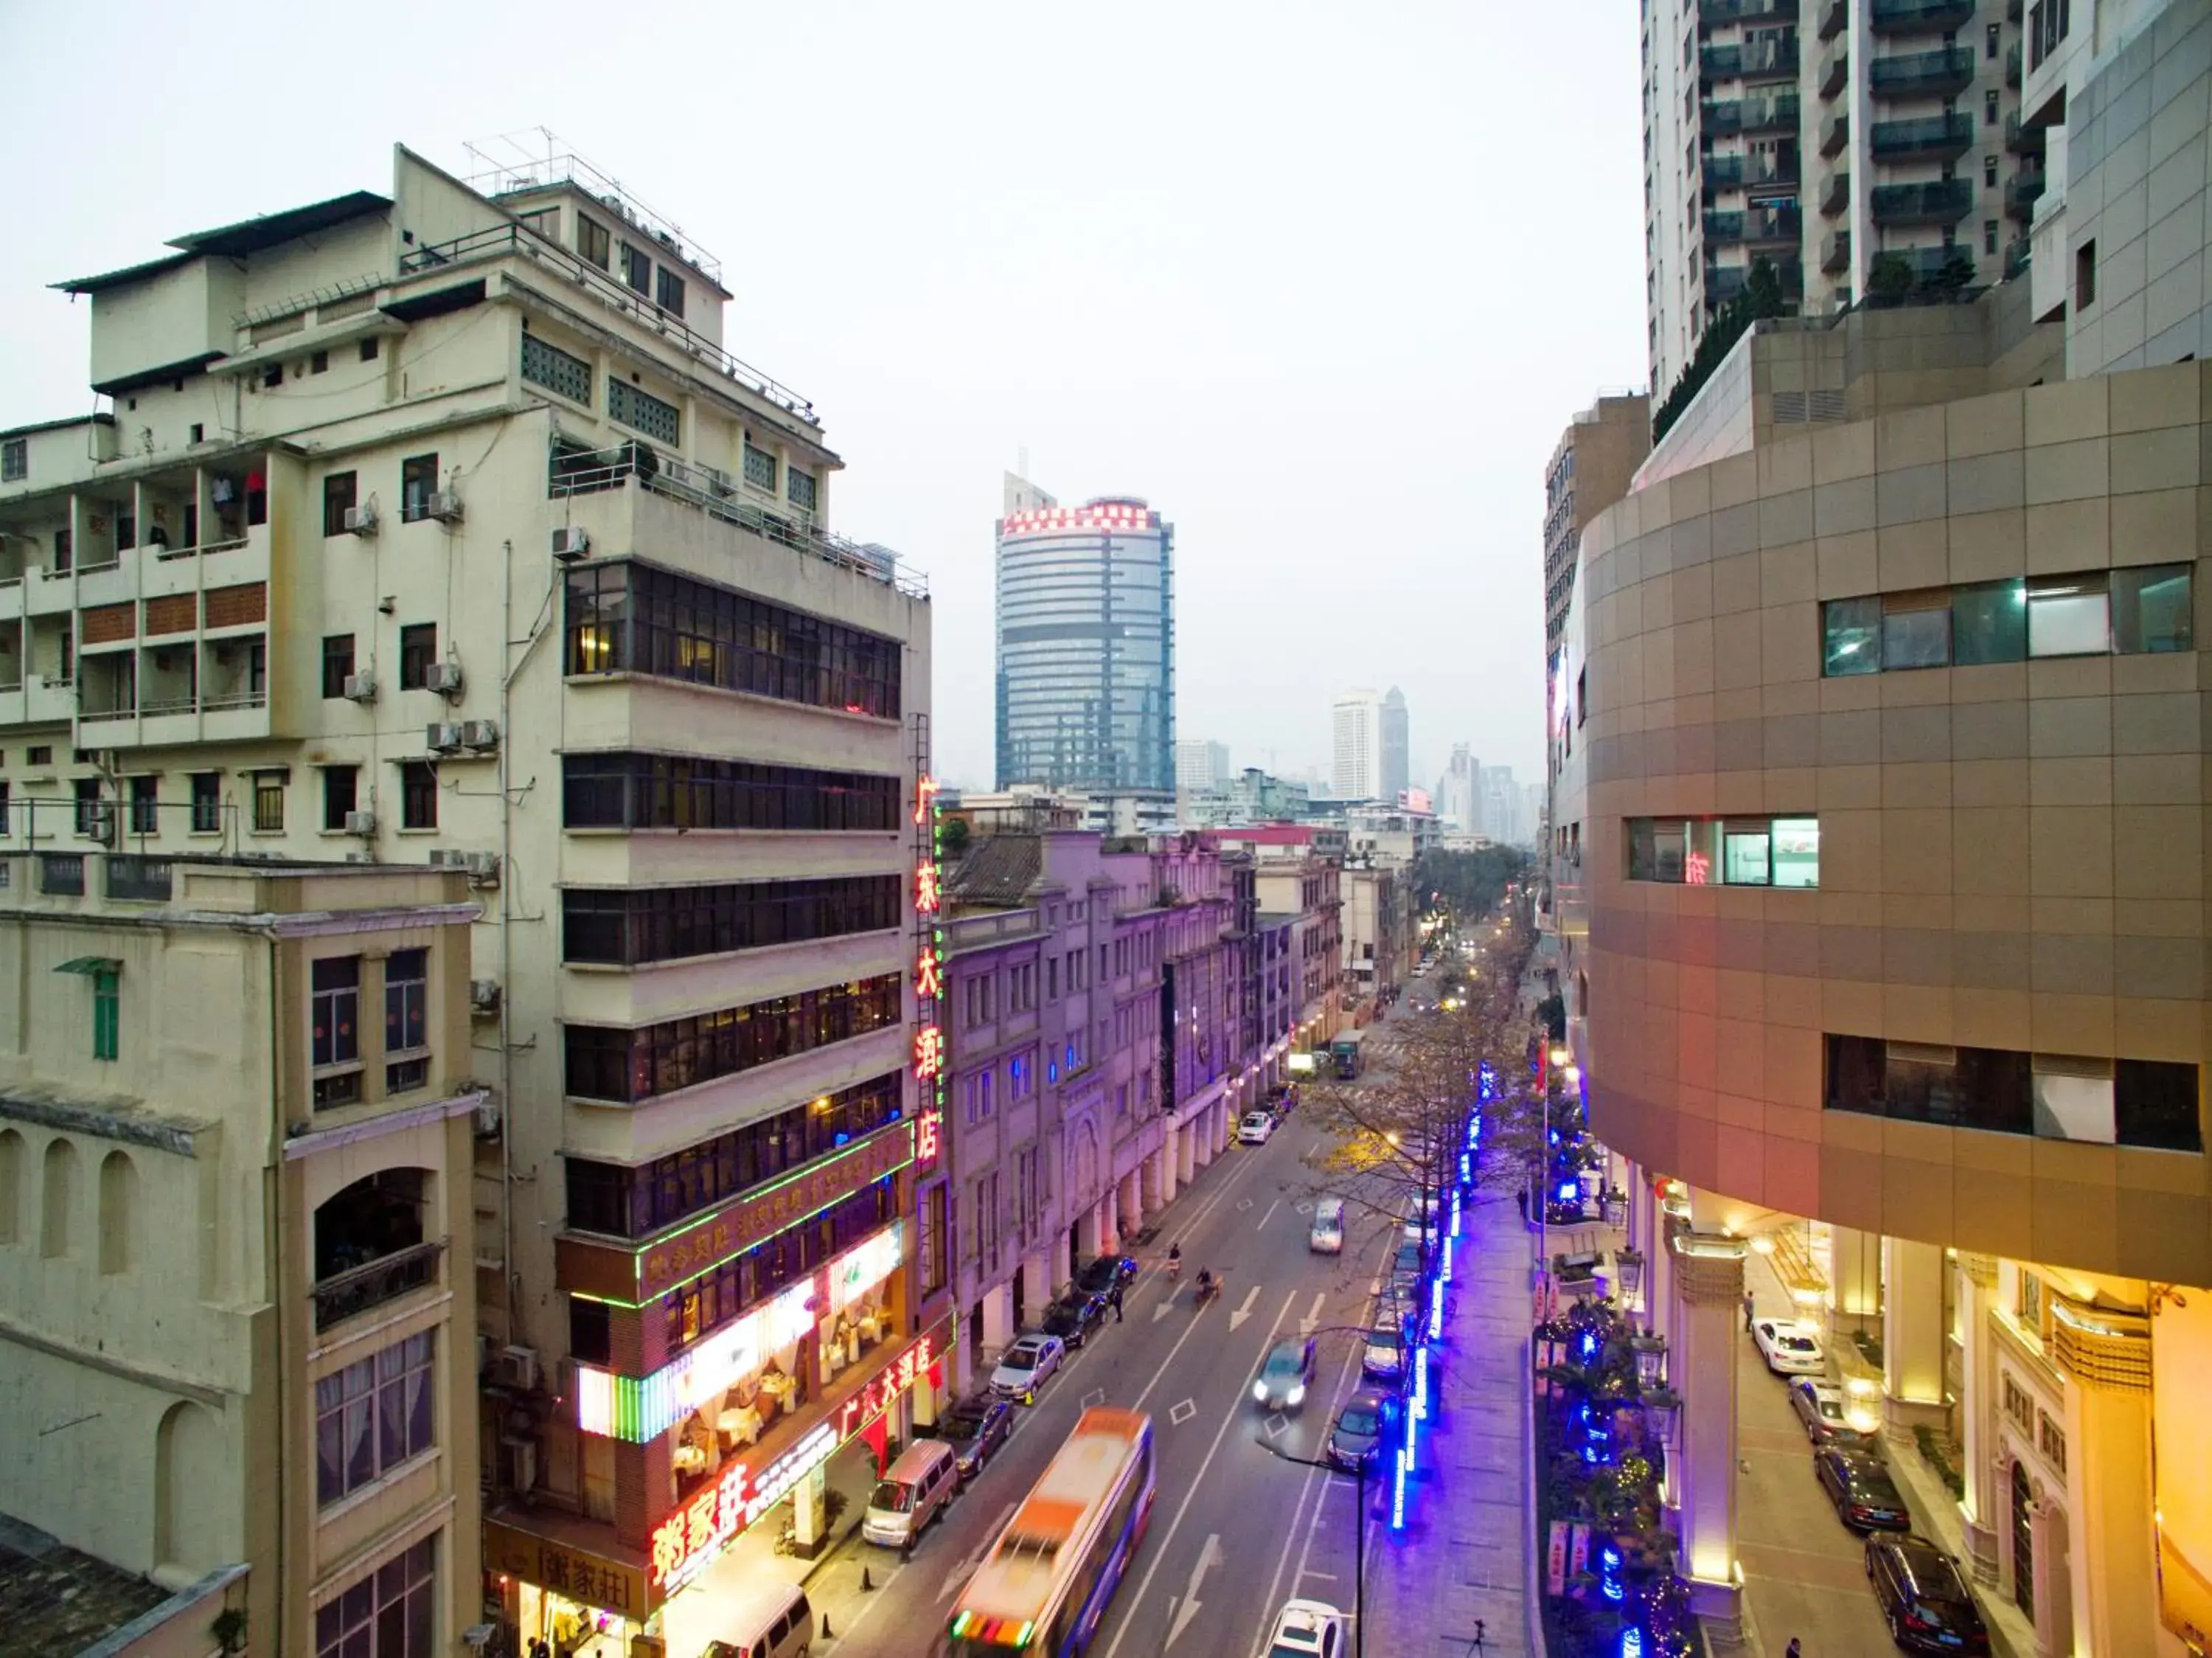 Off site, Neighborhood in Guang Dong Hotel